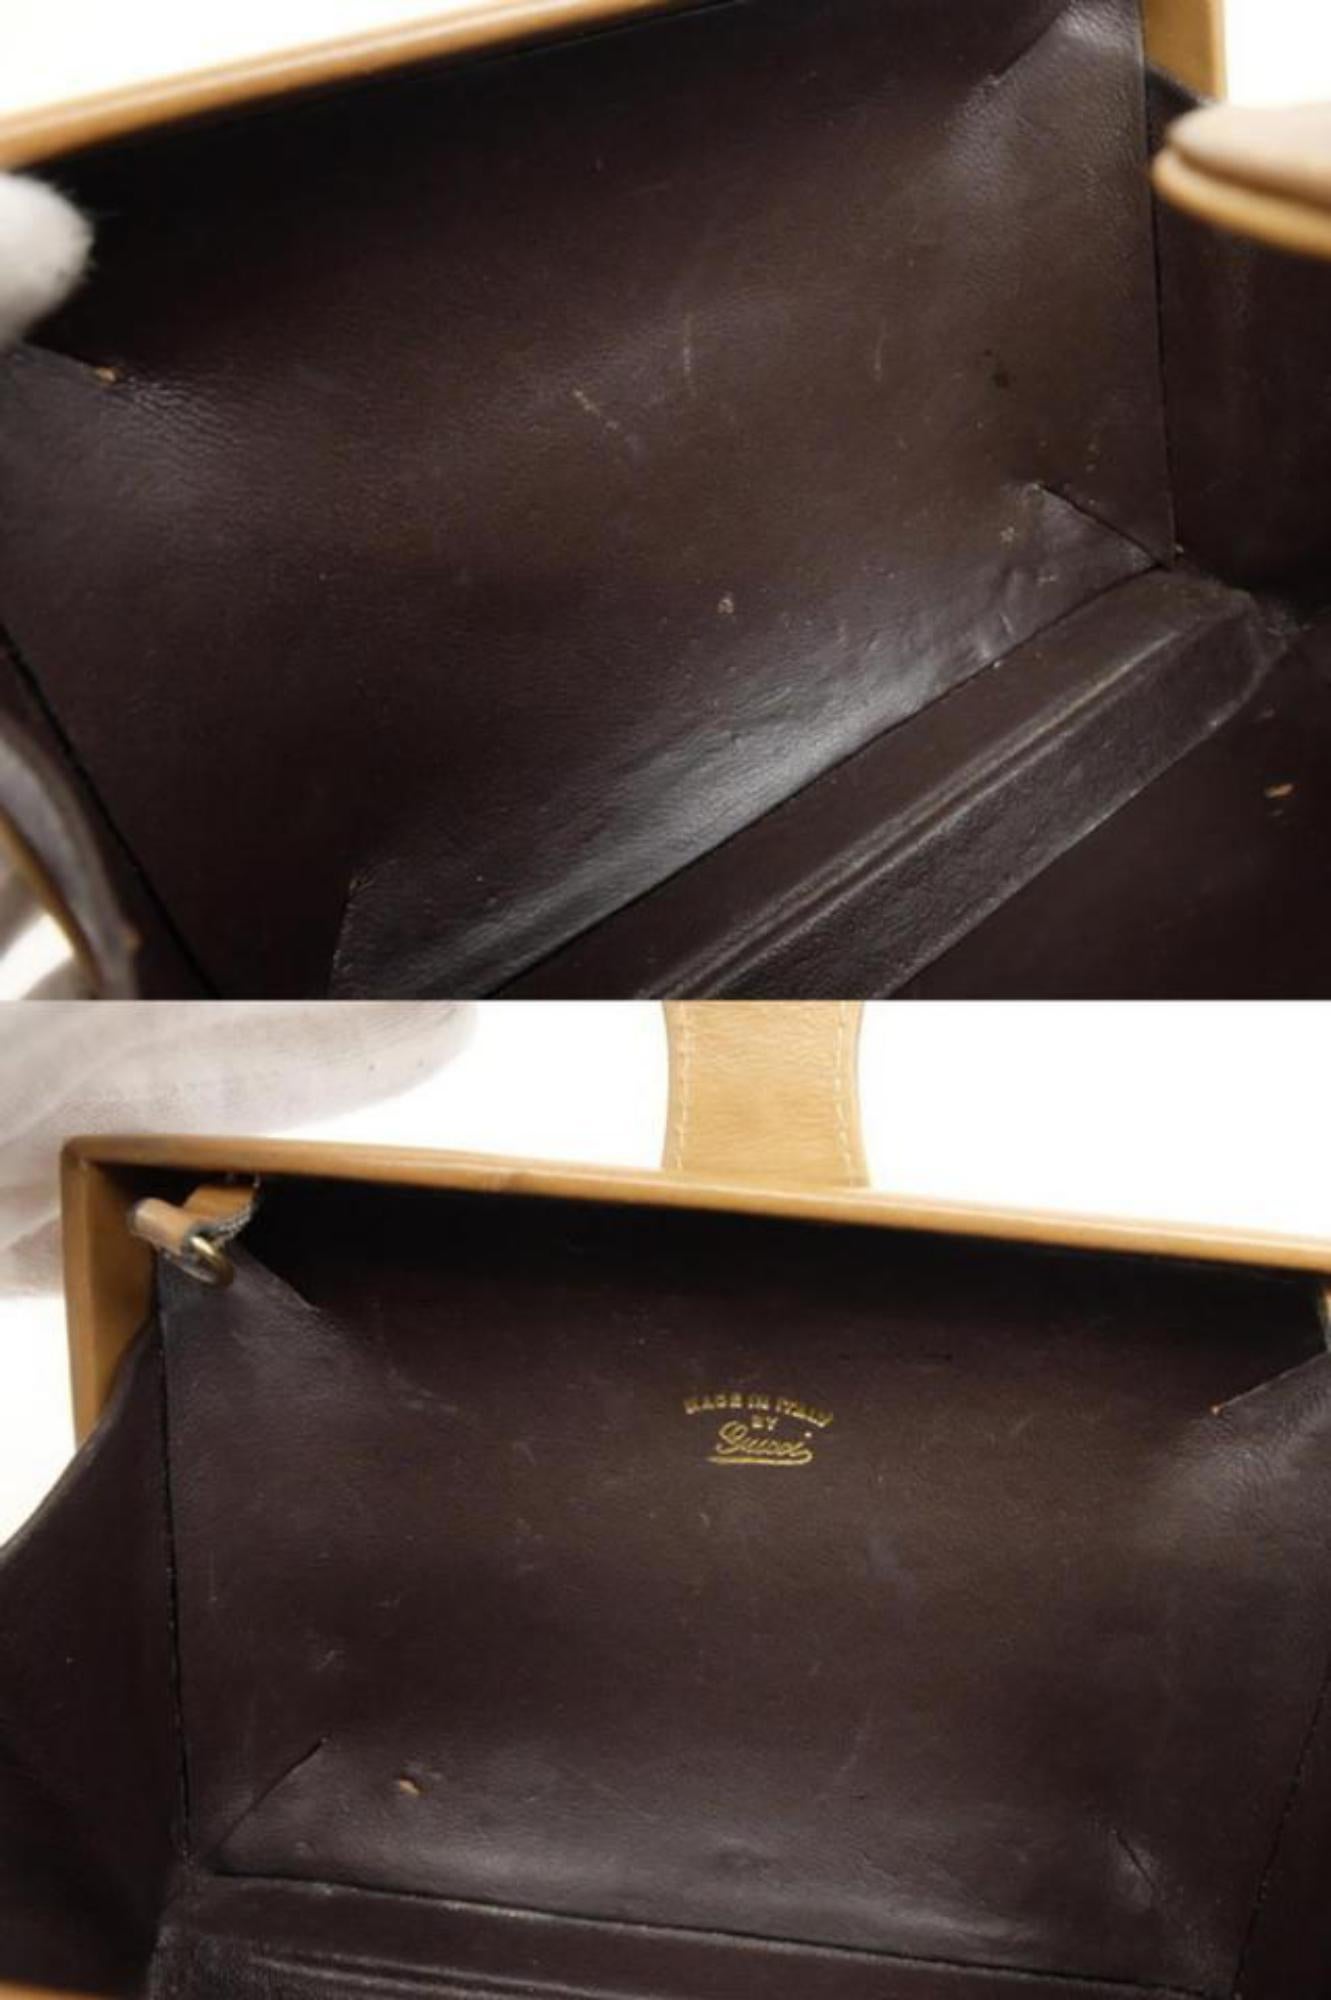 Gucci (Rare) Wooden Minaudiere 2way 230186 Brown Wood Cross Body Bag In Good Condition For Sale In Forest Hills, NY